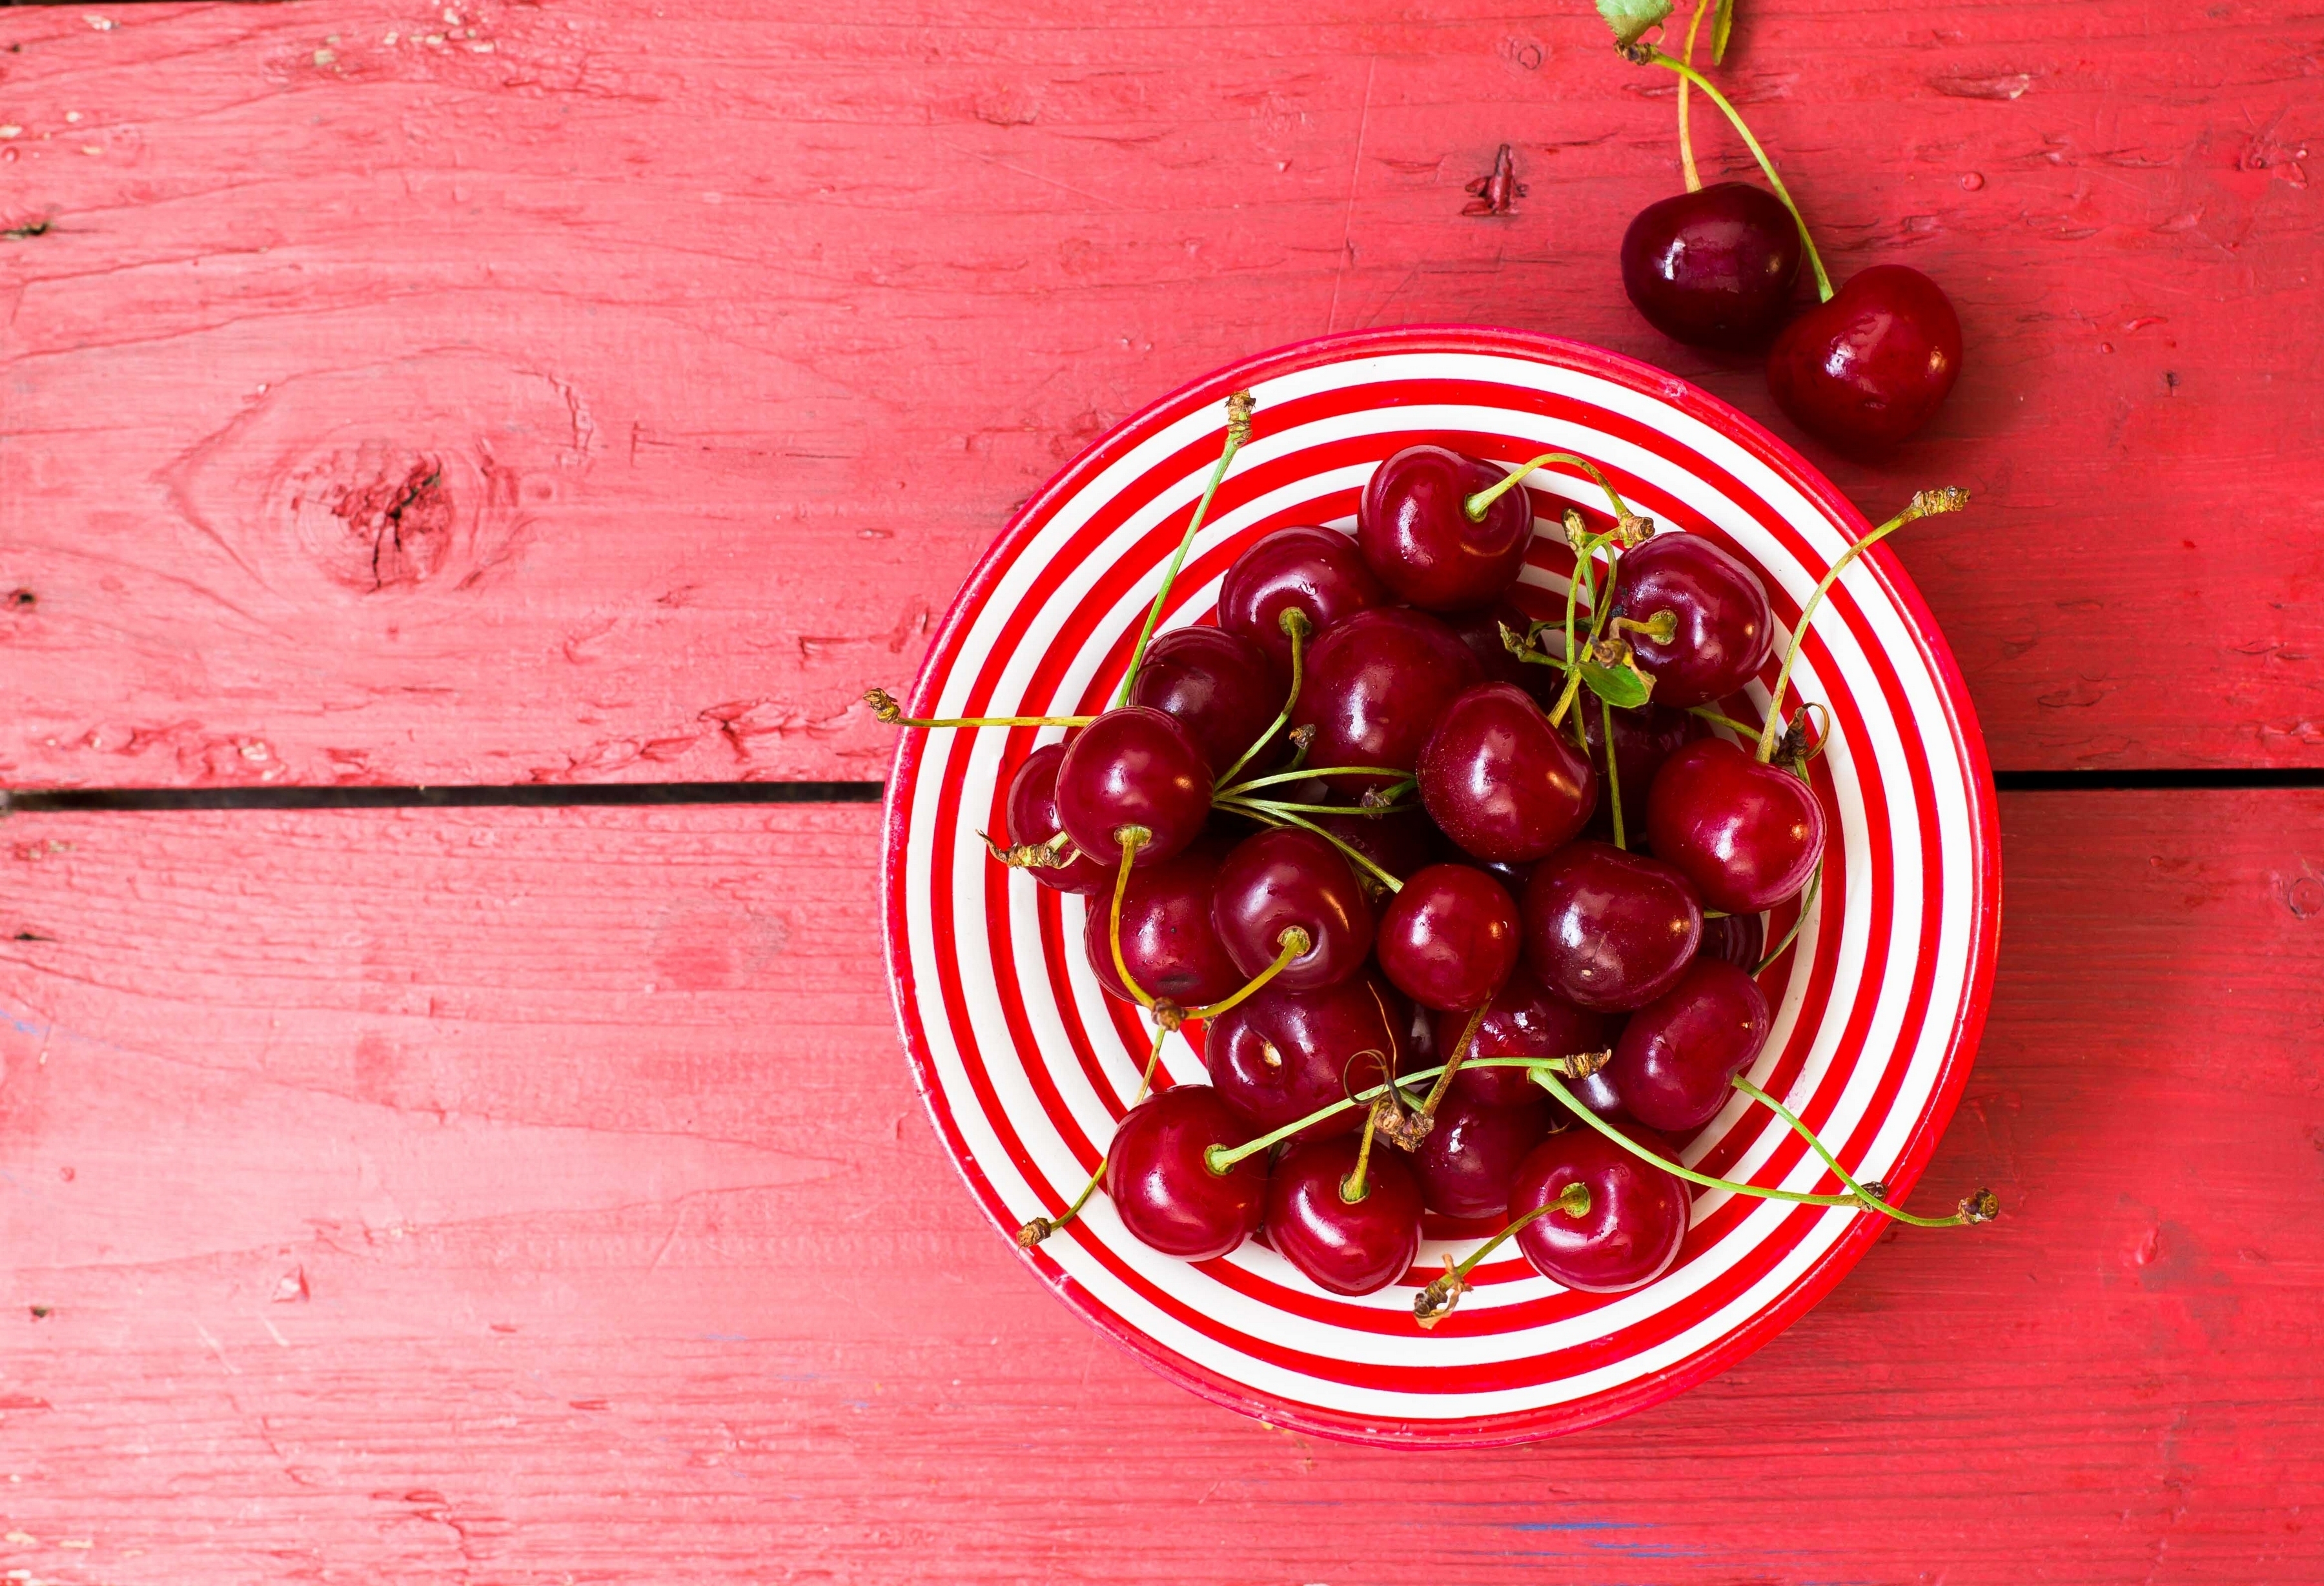 HD wallpaper, Bowl Of Fruits, Cherries, Cherry Fruits, Wooden Background